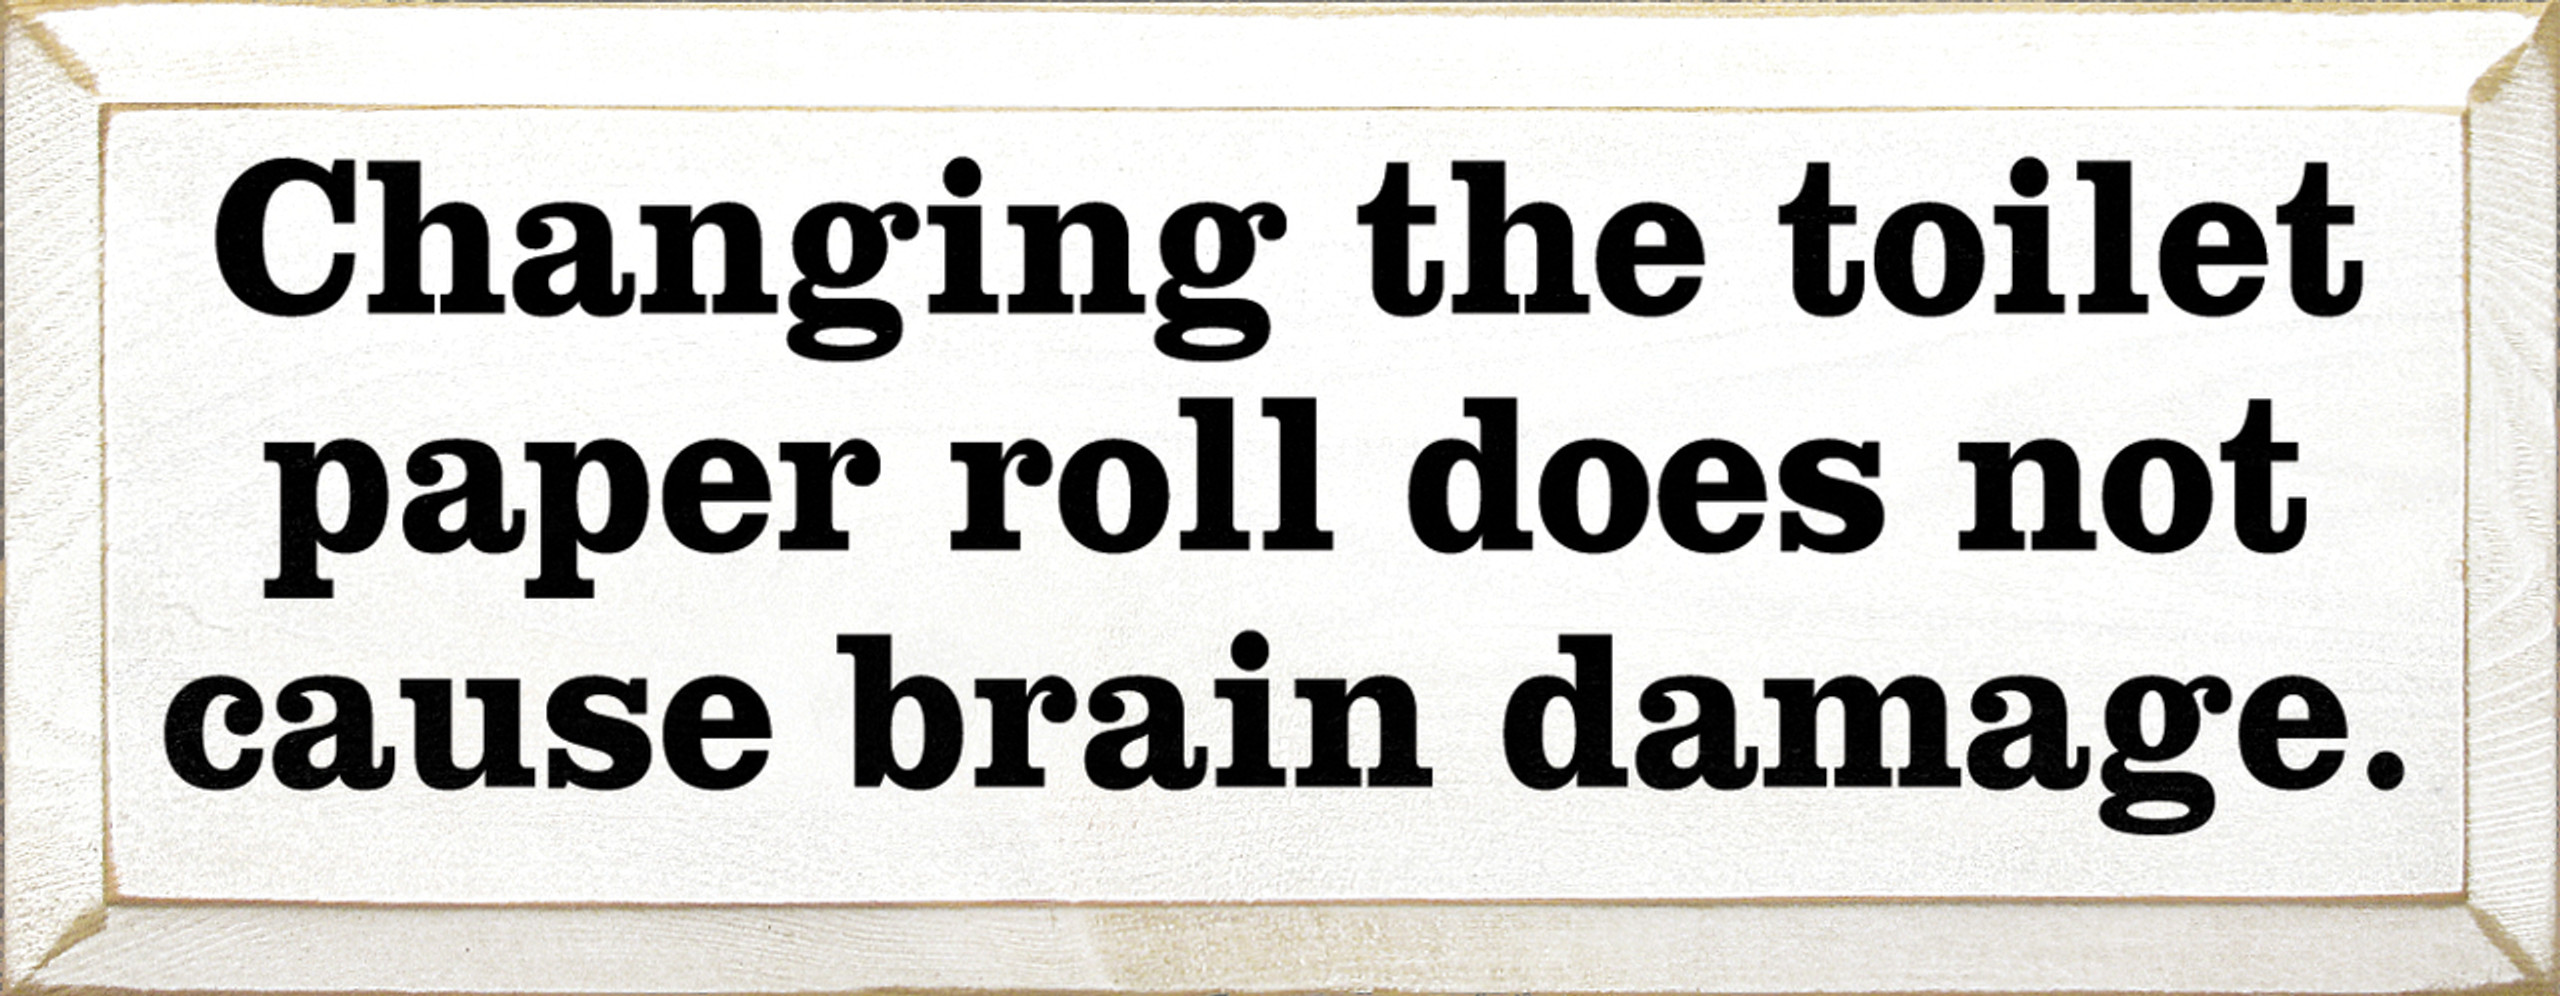 Changing The Toilet Paper Roll Does Not Cause Brain Damage | Funny ...